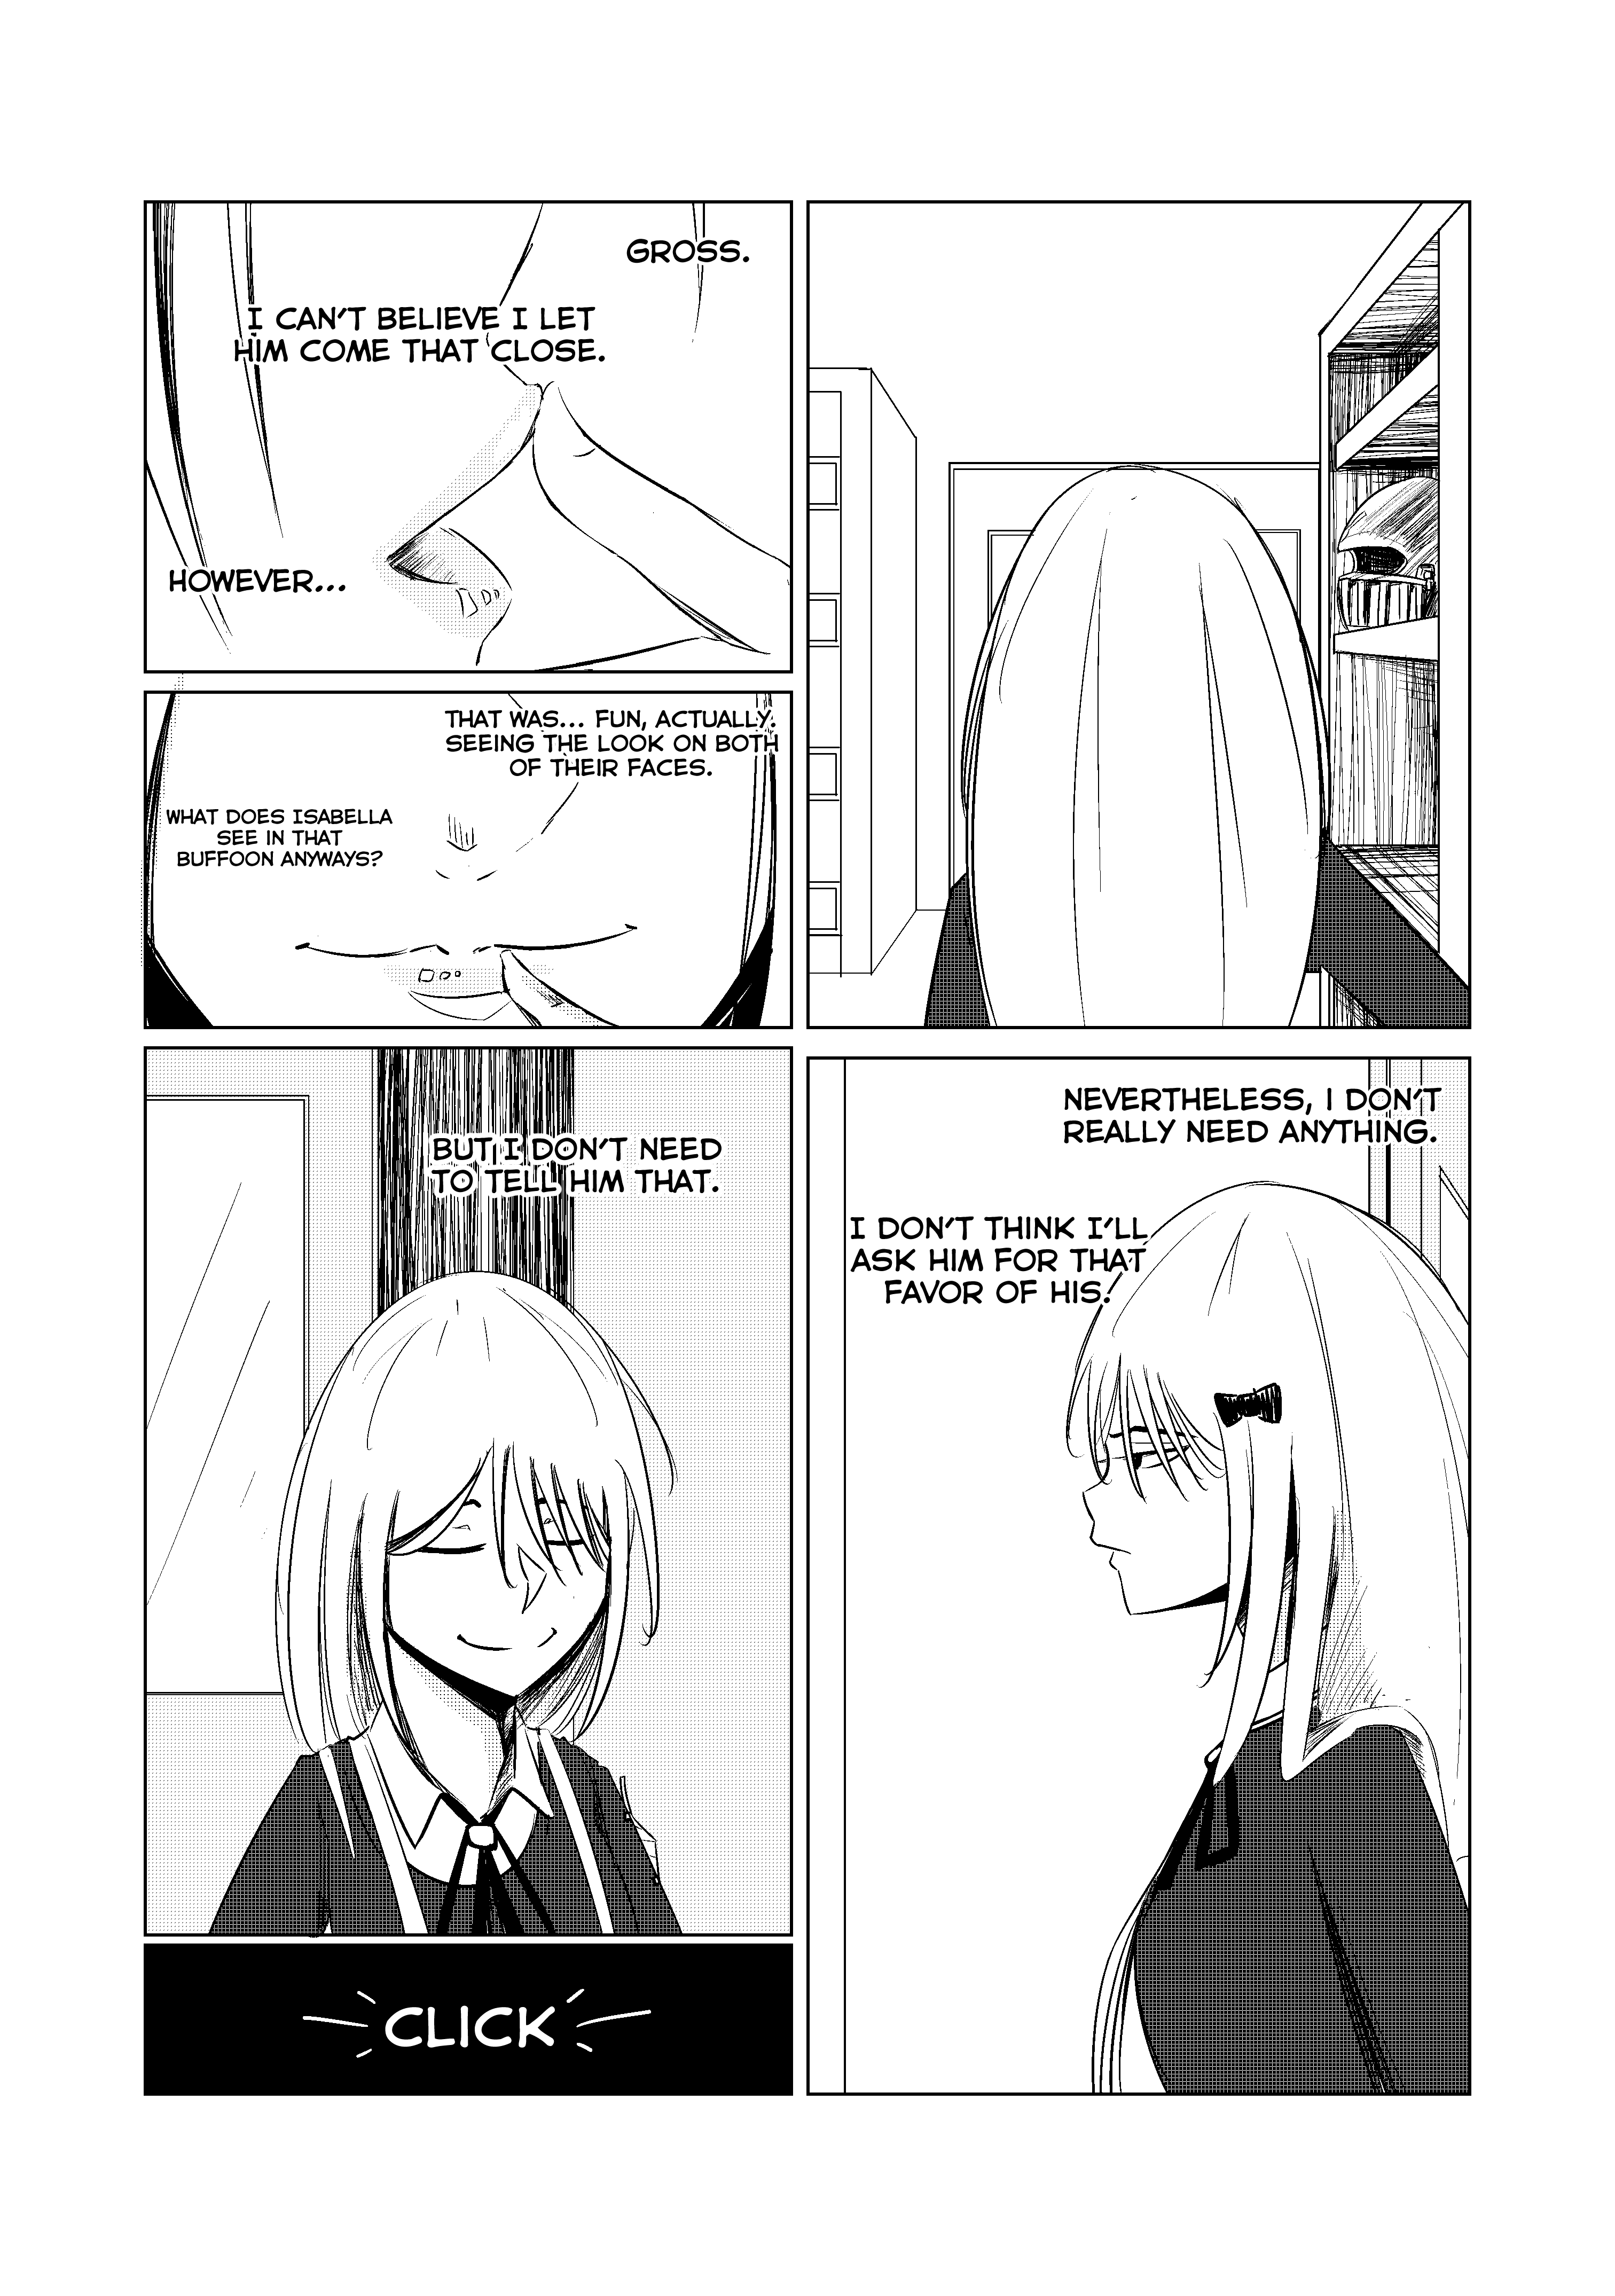 Opposites In Disguise - 1 page 58